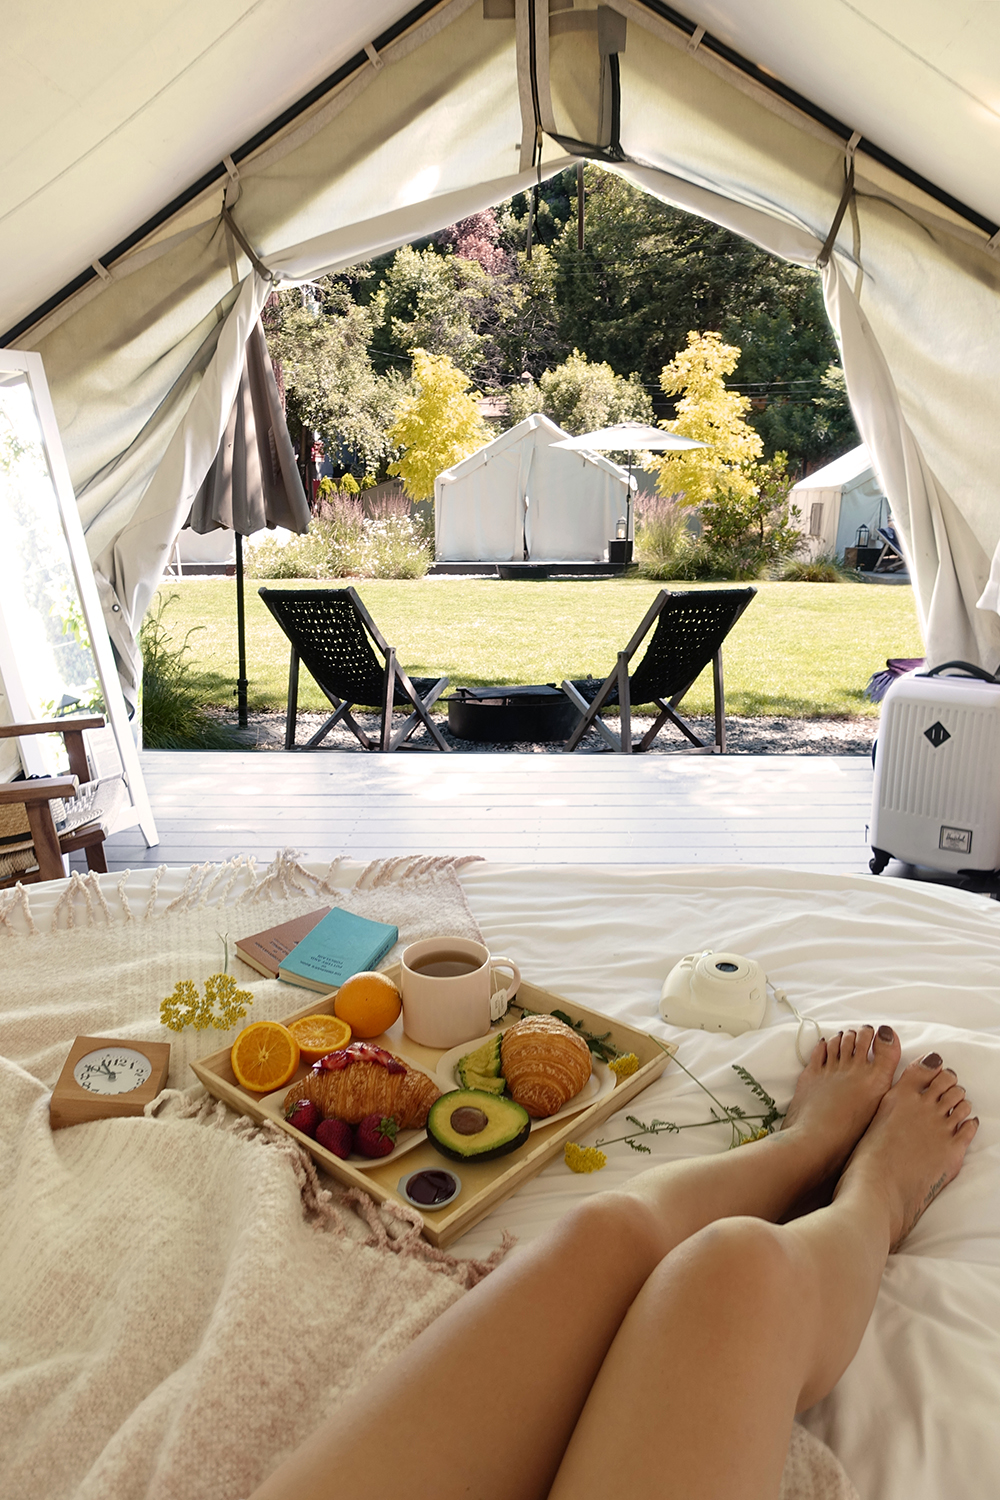 08autocamp-russianriver-sonoma-tent-camping-glamping